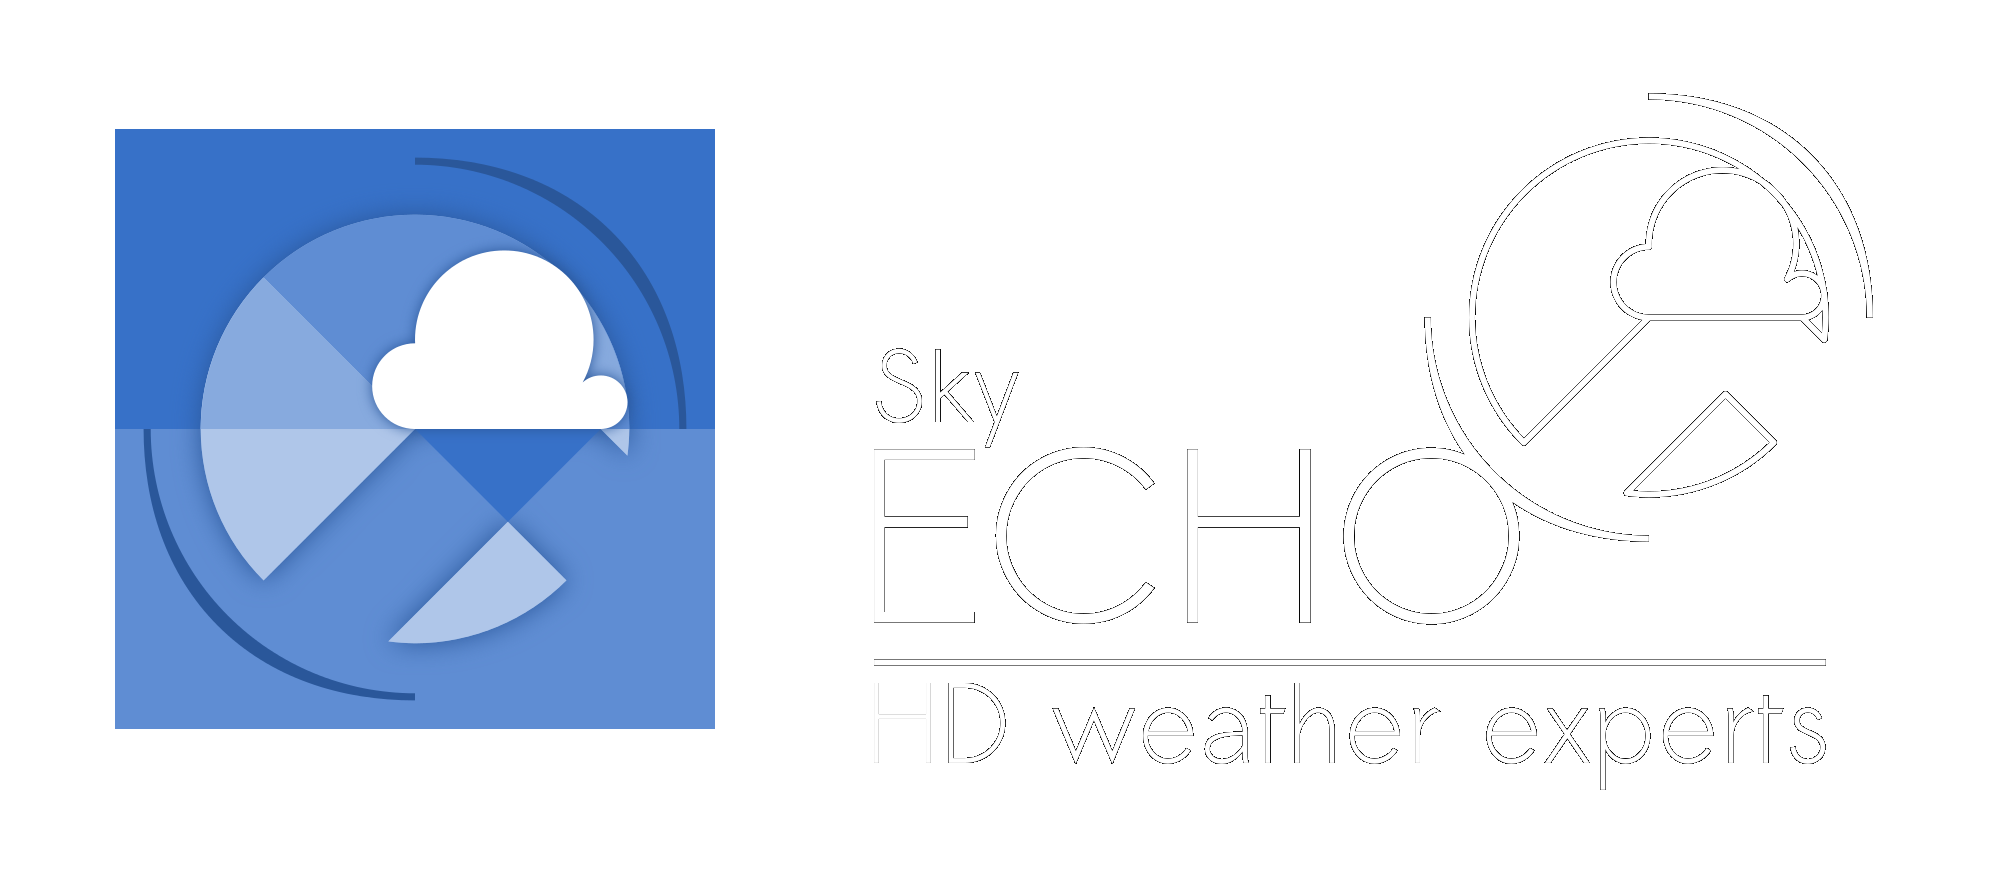 SkyEcho B.V. - It's time to weatherise our activities